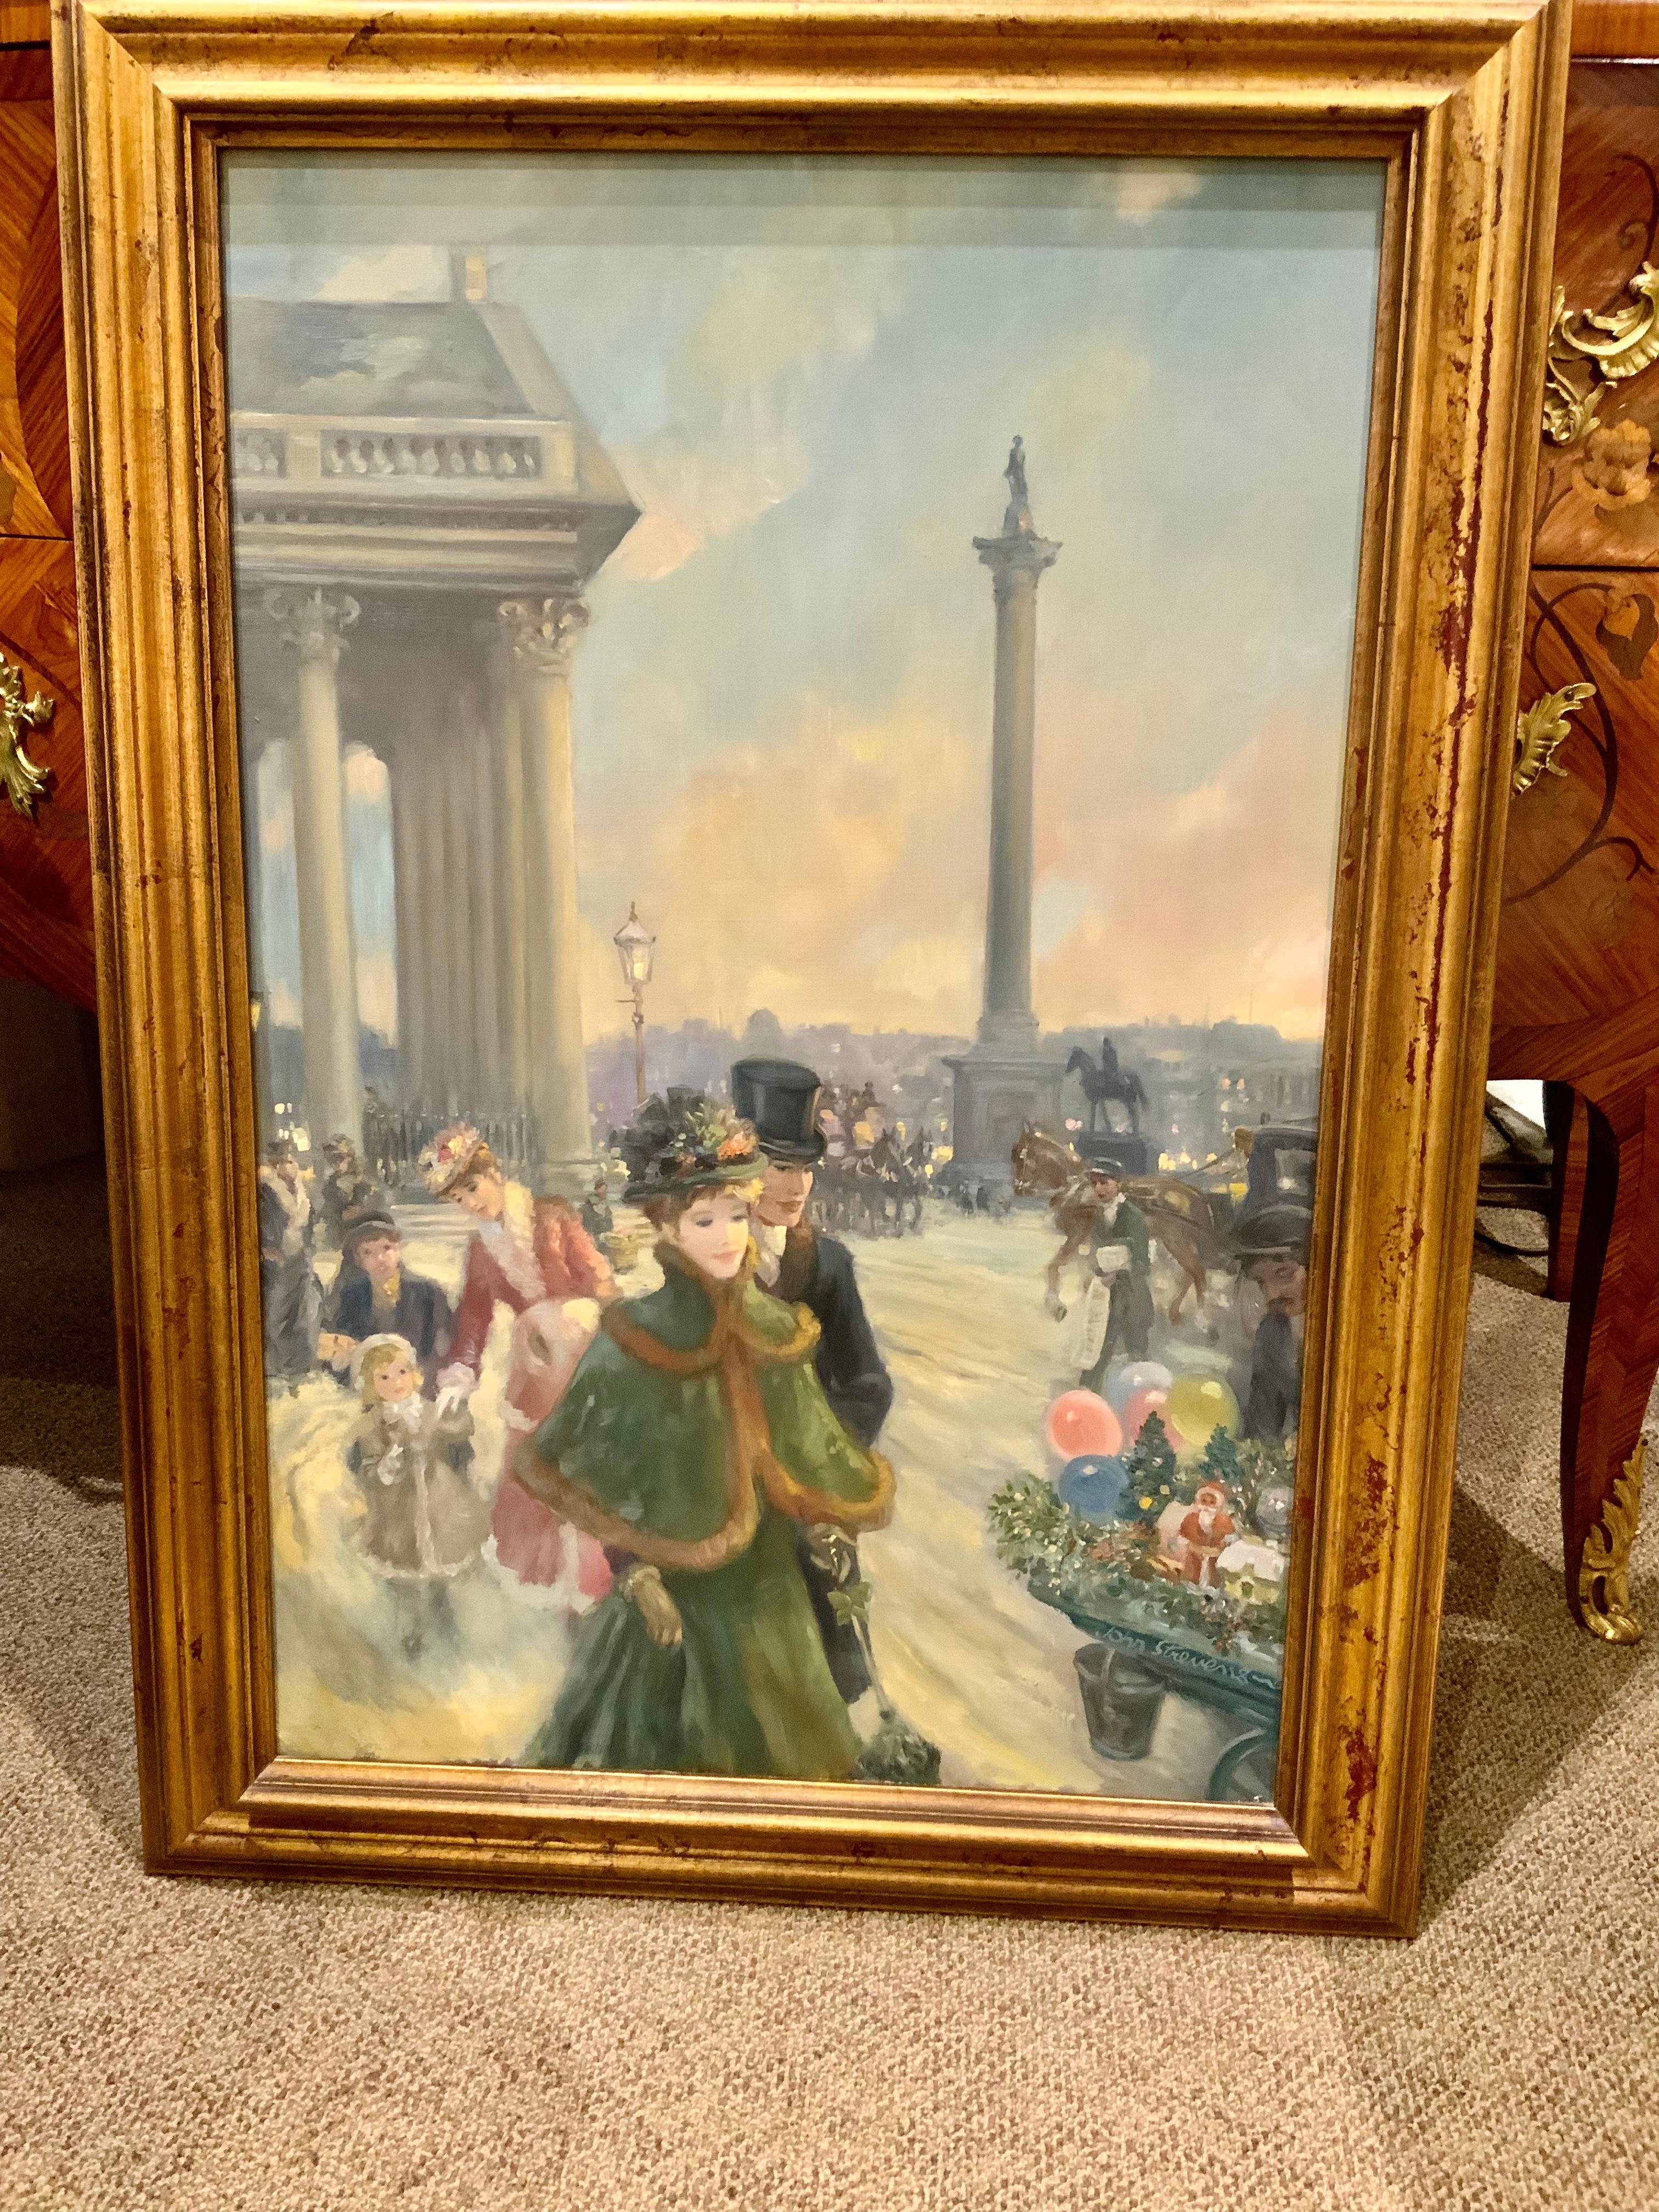 British Original Oil Painting by John Strevens “By St. Martins” 